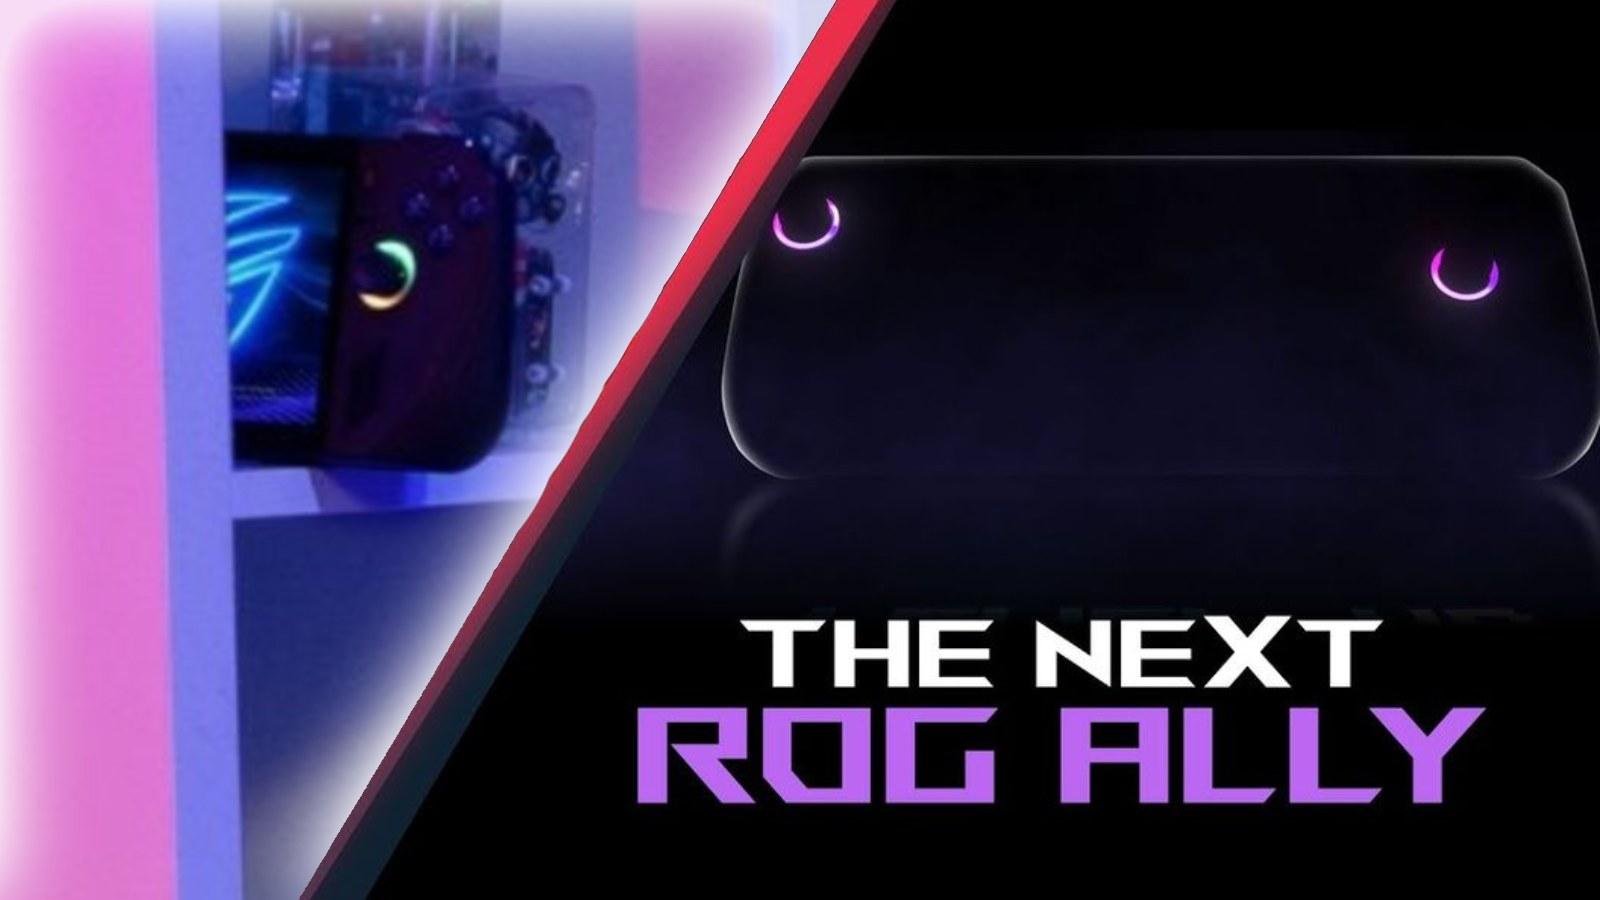 ROG Ally X silhouette next to teaser